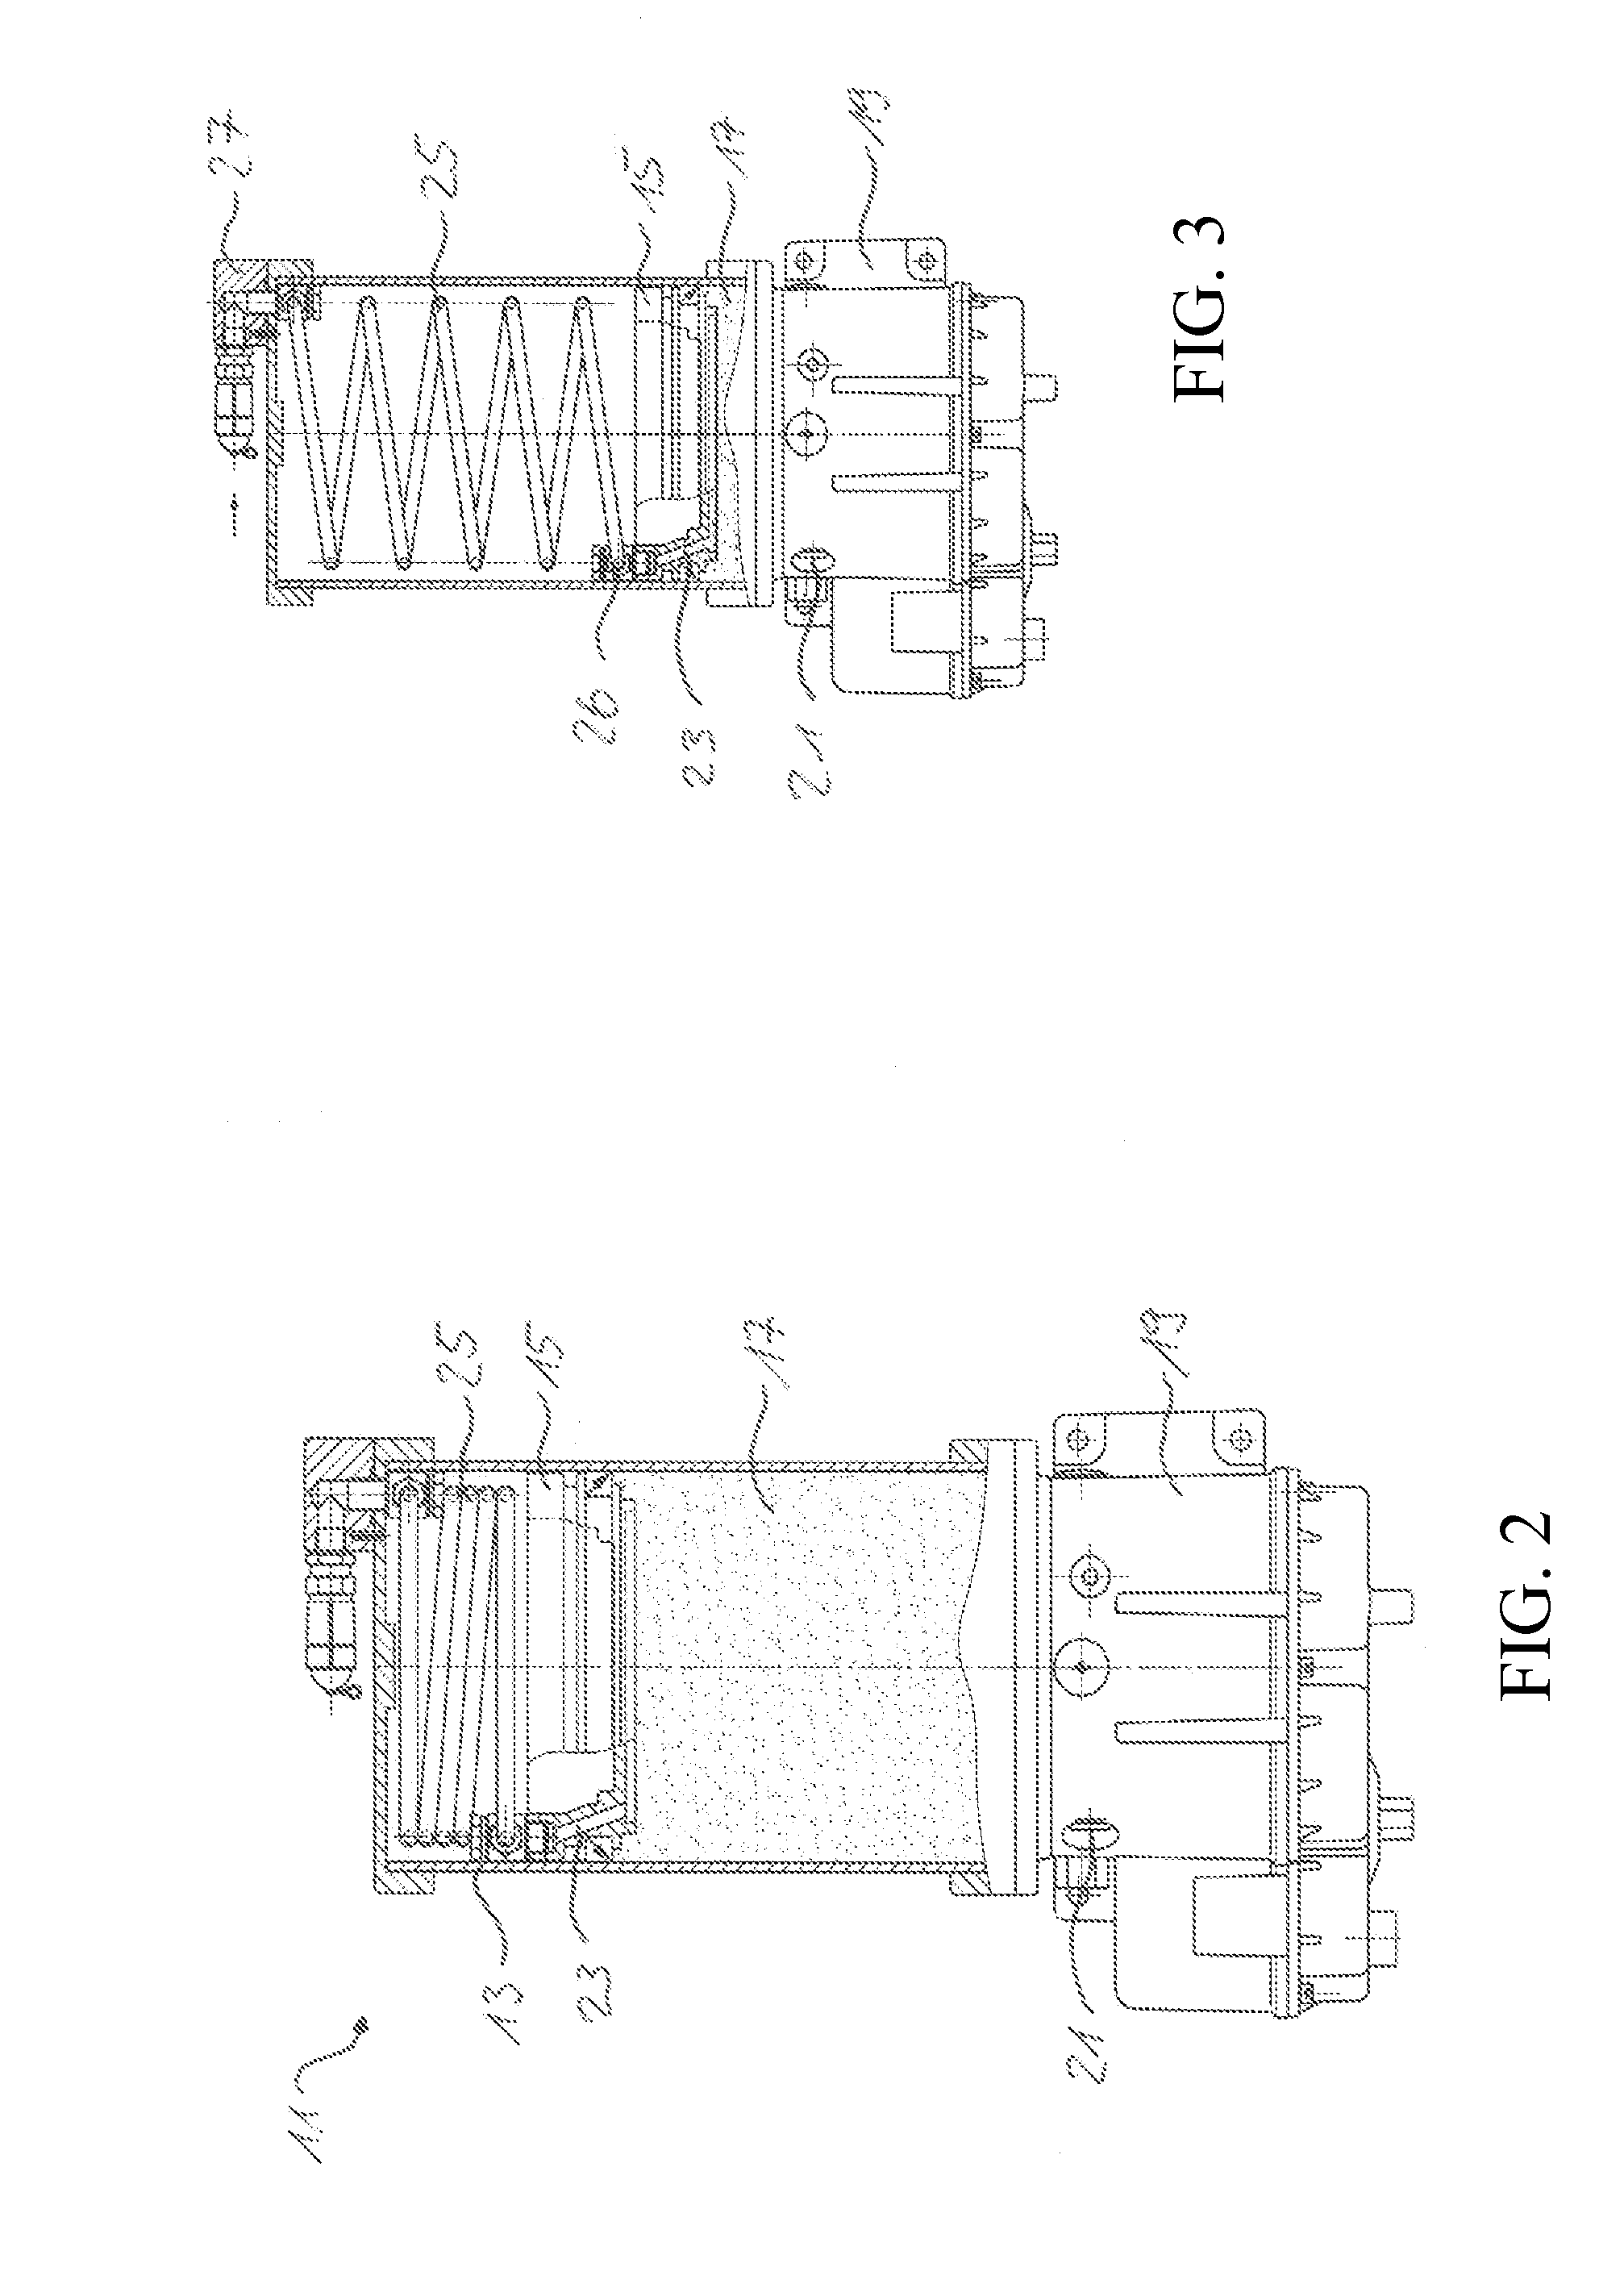 Lubricant supply device and method for operating a lubricant supply device